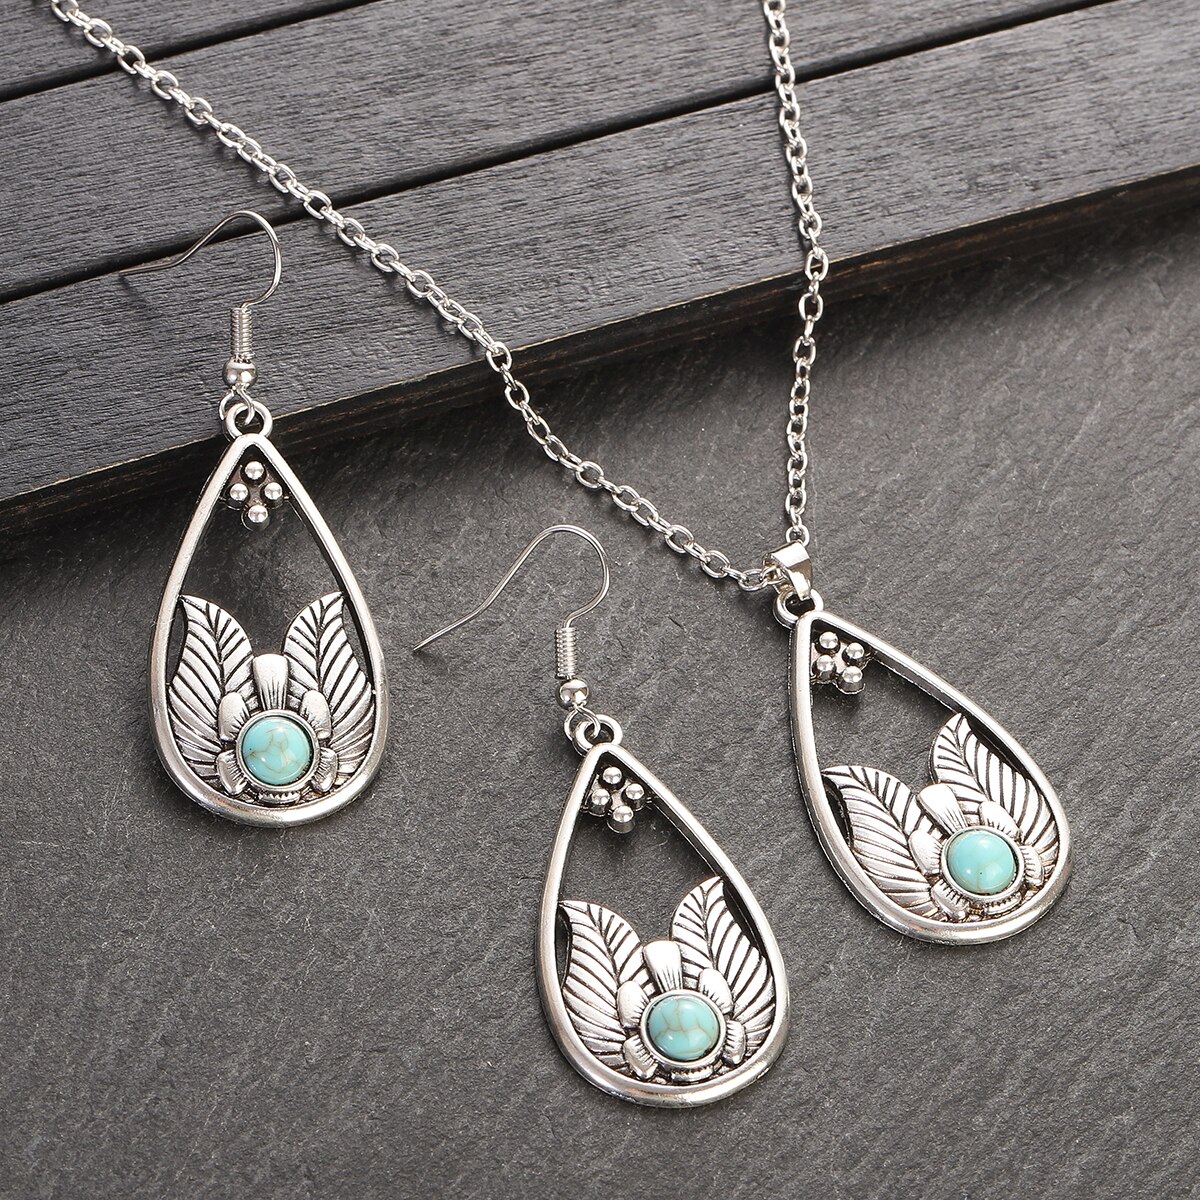 Classic-Ethnic-Silver-Color-Water-Drop-Jewelry-Sets-Ladies-Bohemia-Colorful-Flowers-Pendant-Necklace-1005004920943652-2